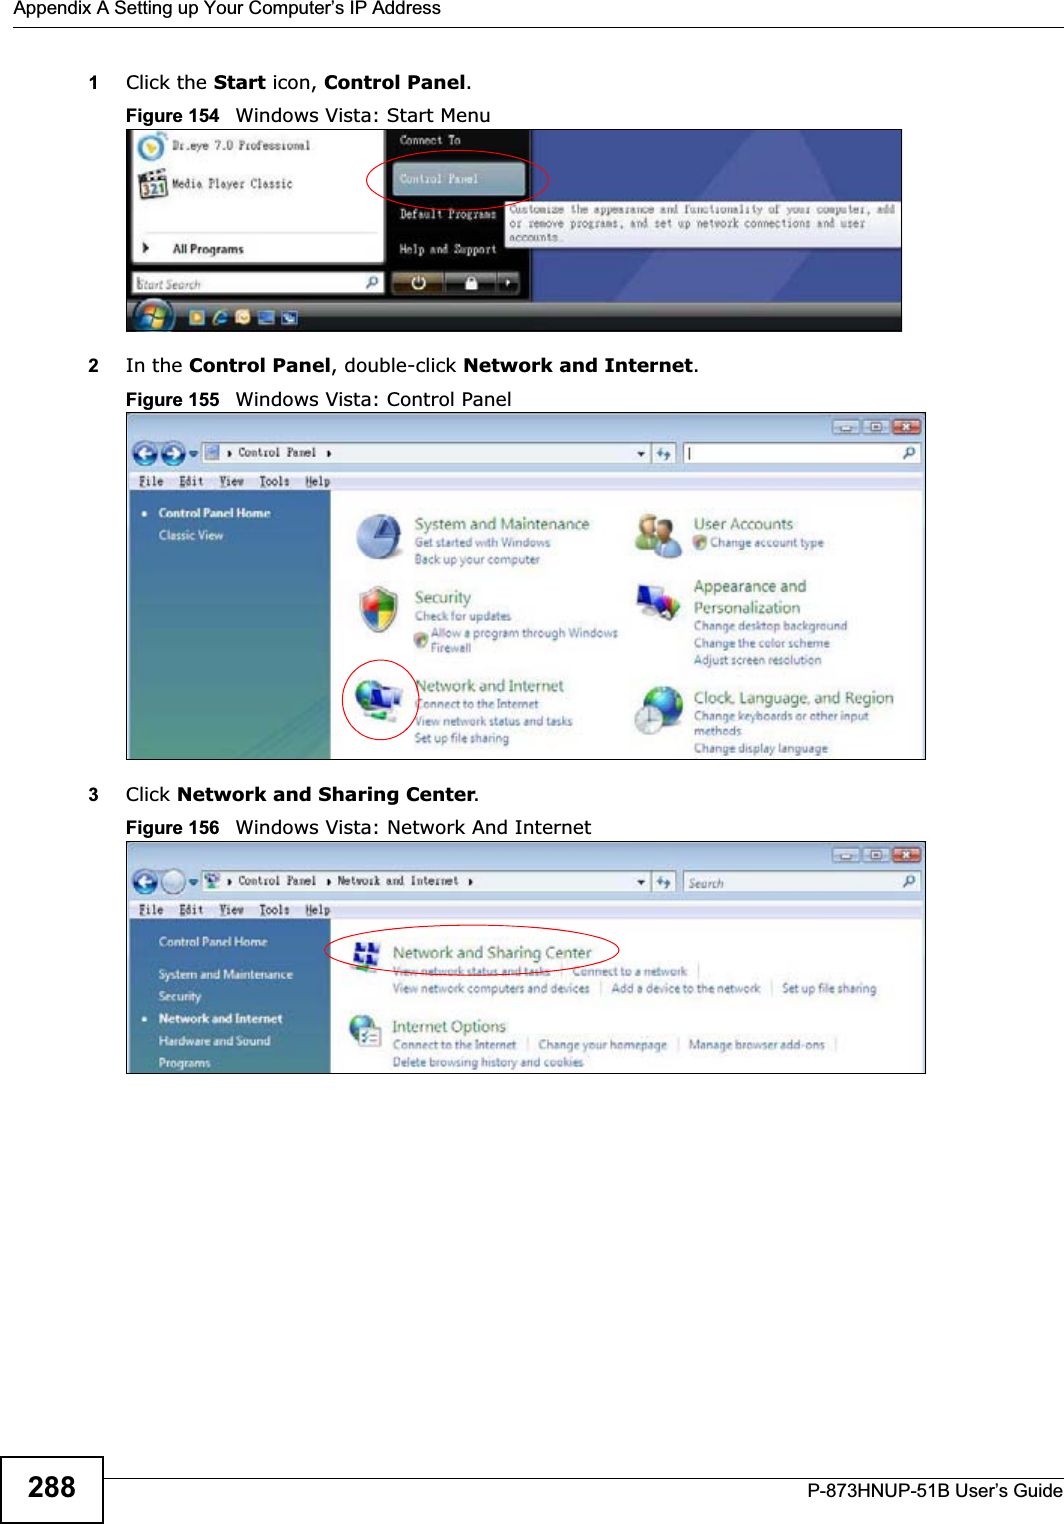 Appendix A Setting up Your Computer’s IP AddressP-873HNUP-51B User’s Guide2881Click the Start icon, Control Panel.Figure 154   Windows Vista: Start Menu2In the Control Panel, double-click Network and Internet.Figure 155   Windows Vista: Control Panel3Click Network and Sharing Center.Figure 156   Windows Vista: Network And Internet